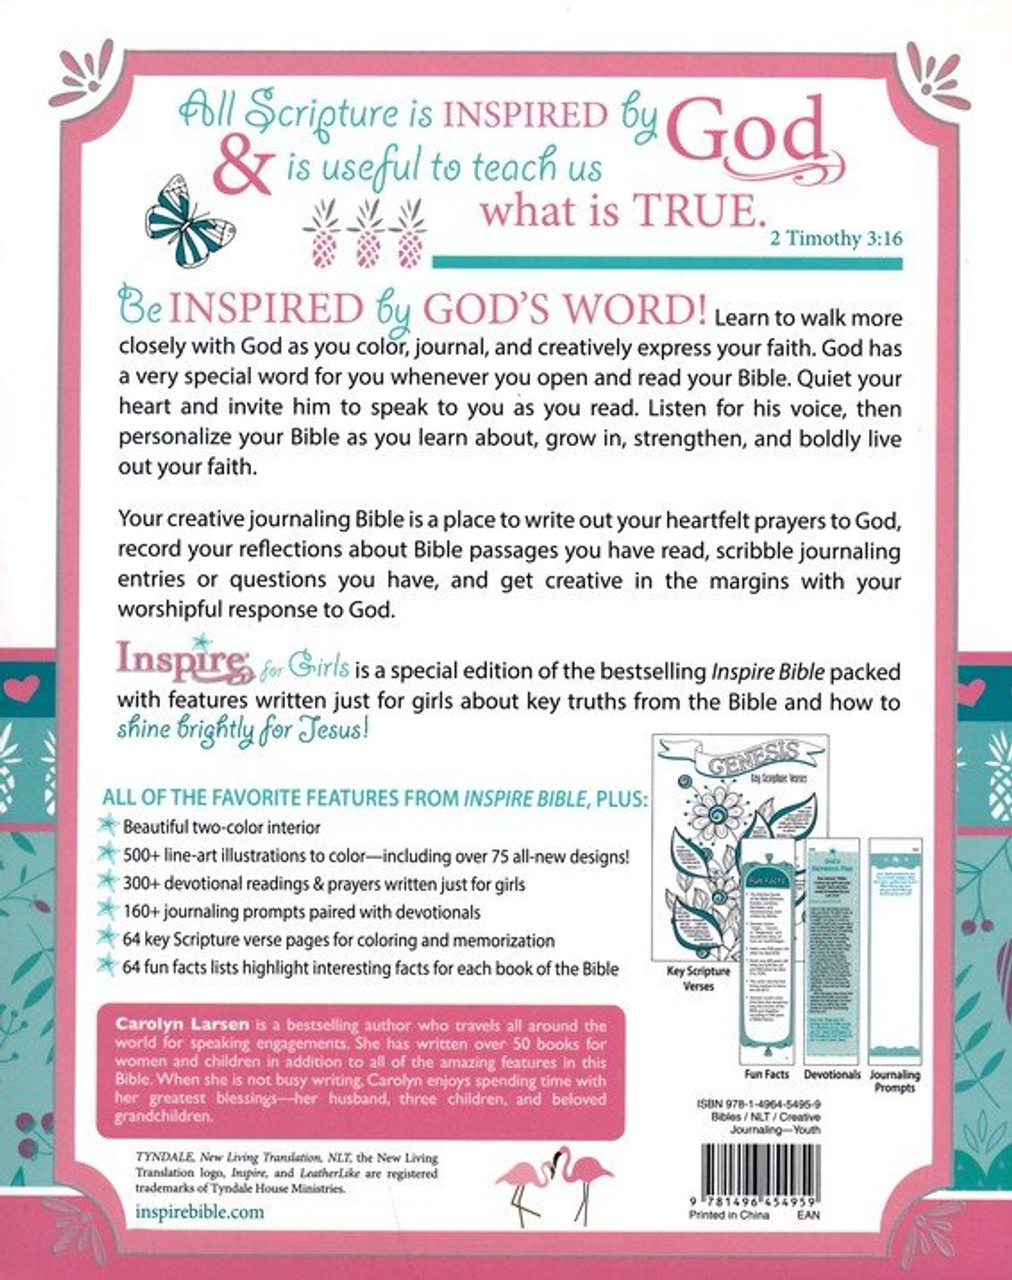 NLT Inspire Bible for Girls: The Bible for Coloring & Creative Journaling--soft leather-look, pink